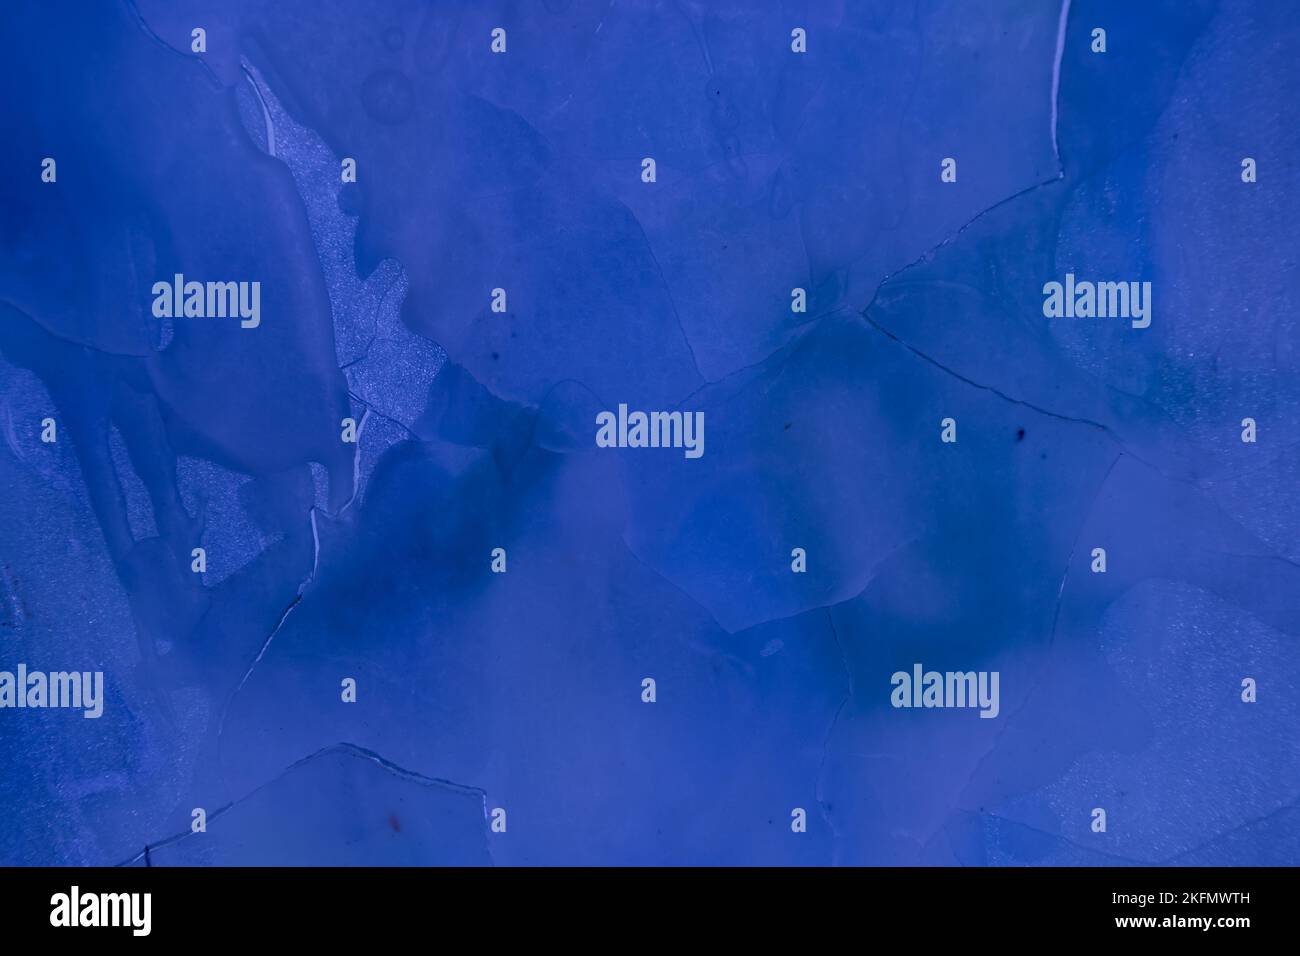 Blue stained and cracked frosted glass texture for background Stock Photo